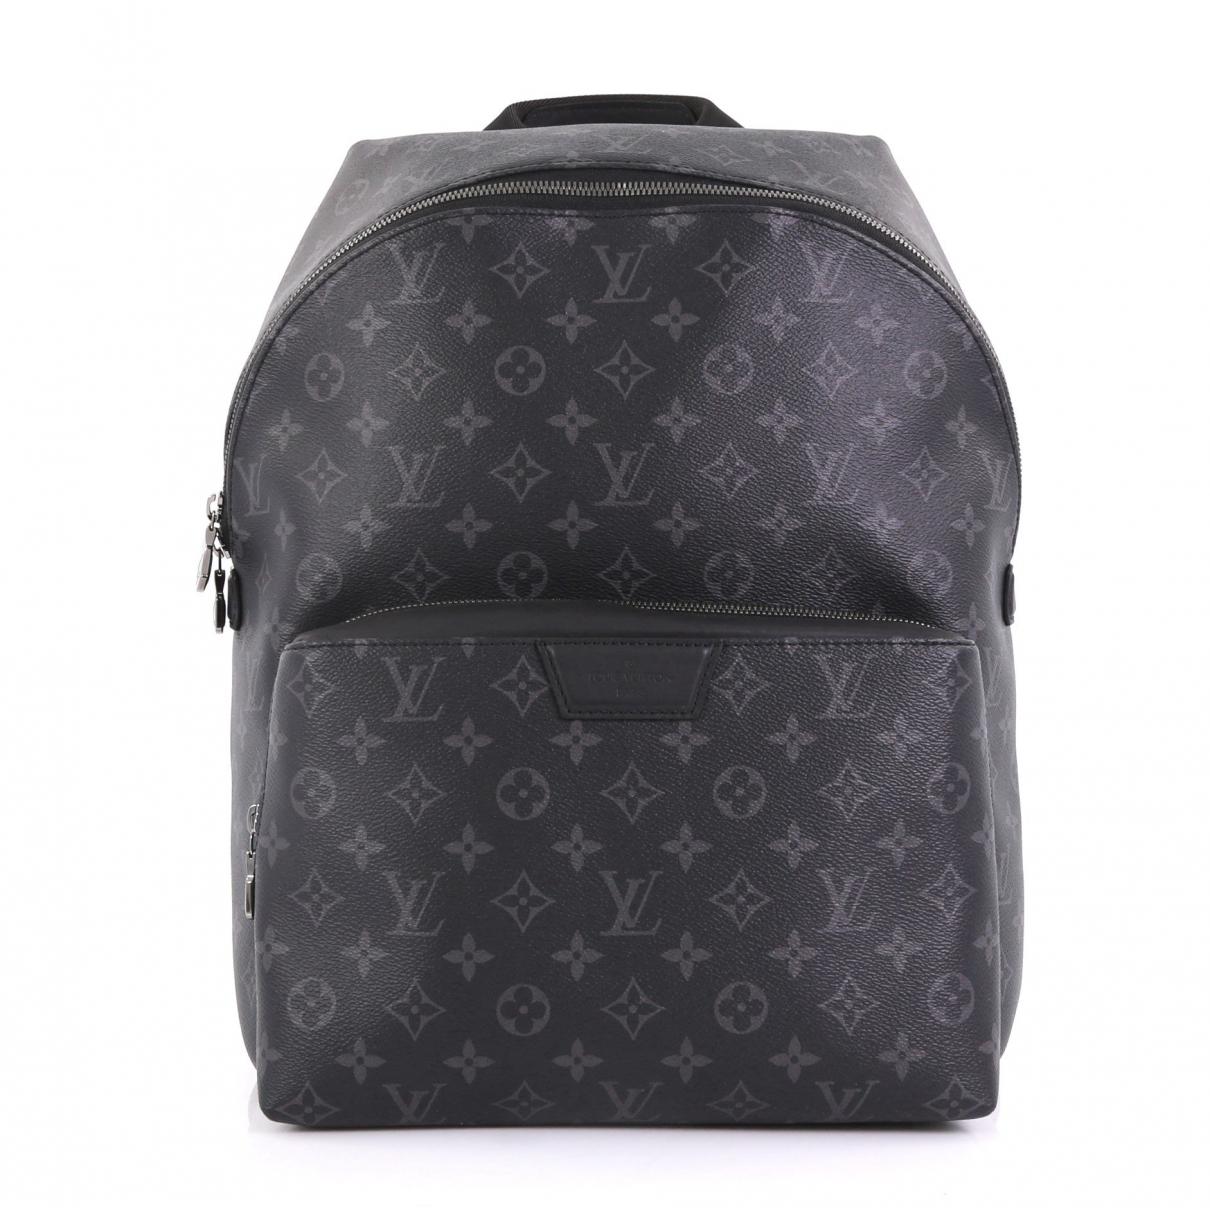 Louis Vuitton Apollo Backpack Black Cloth Bag in Black for Men - Lyst